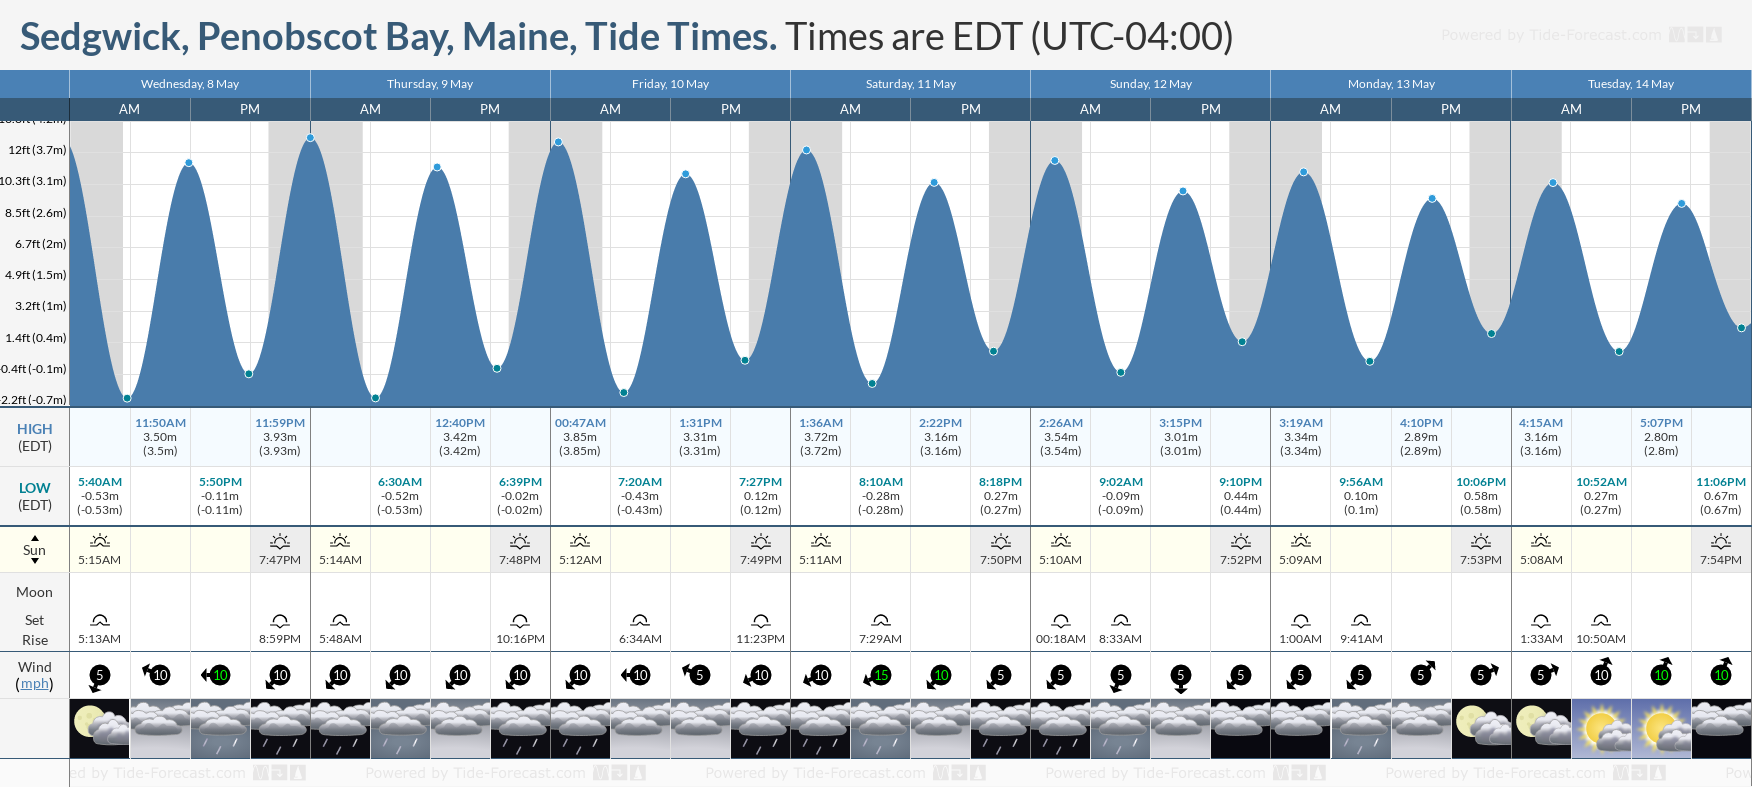 Sedgwick, Penobscot Bay, Maine Tide Chart including high and low tide tide times for the next 7 days